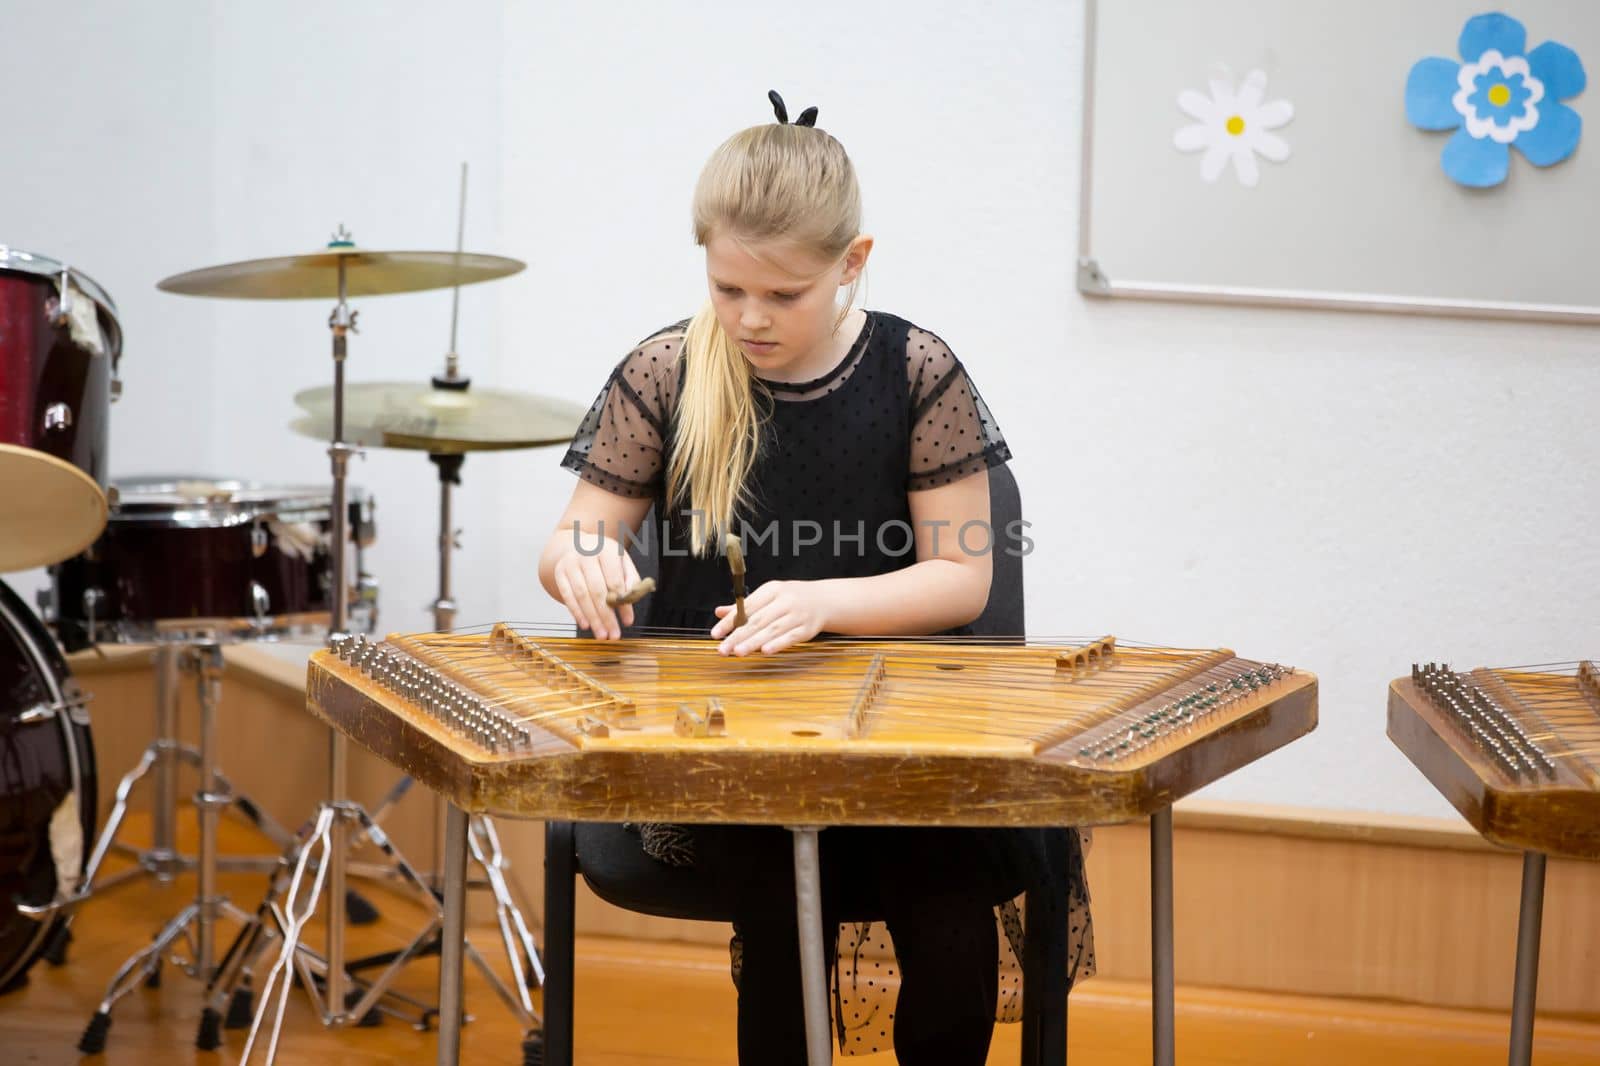 May 21, 2021 Belarus. city of Gomil. Holiday at the music school.The girl plays the ethnic instrument dulcimer by Sviatlana